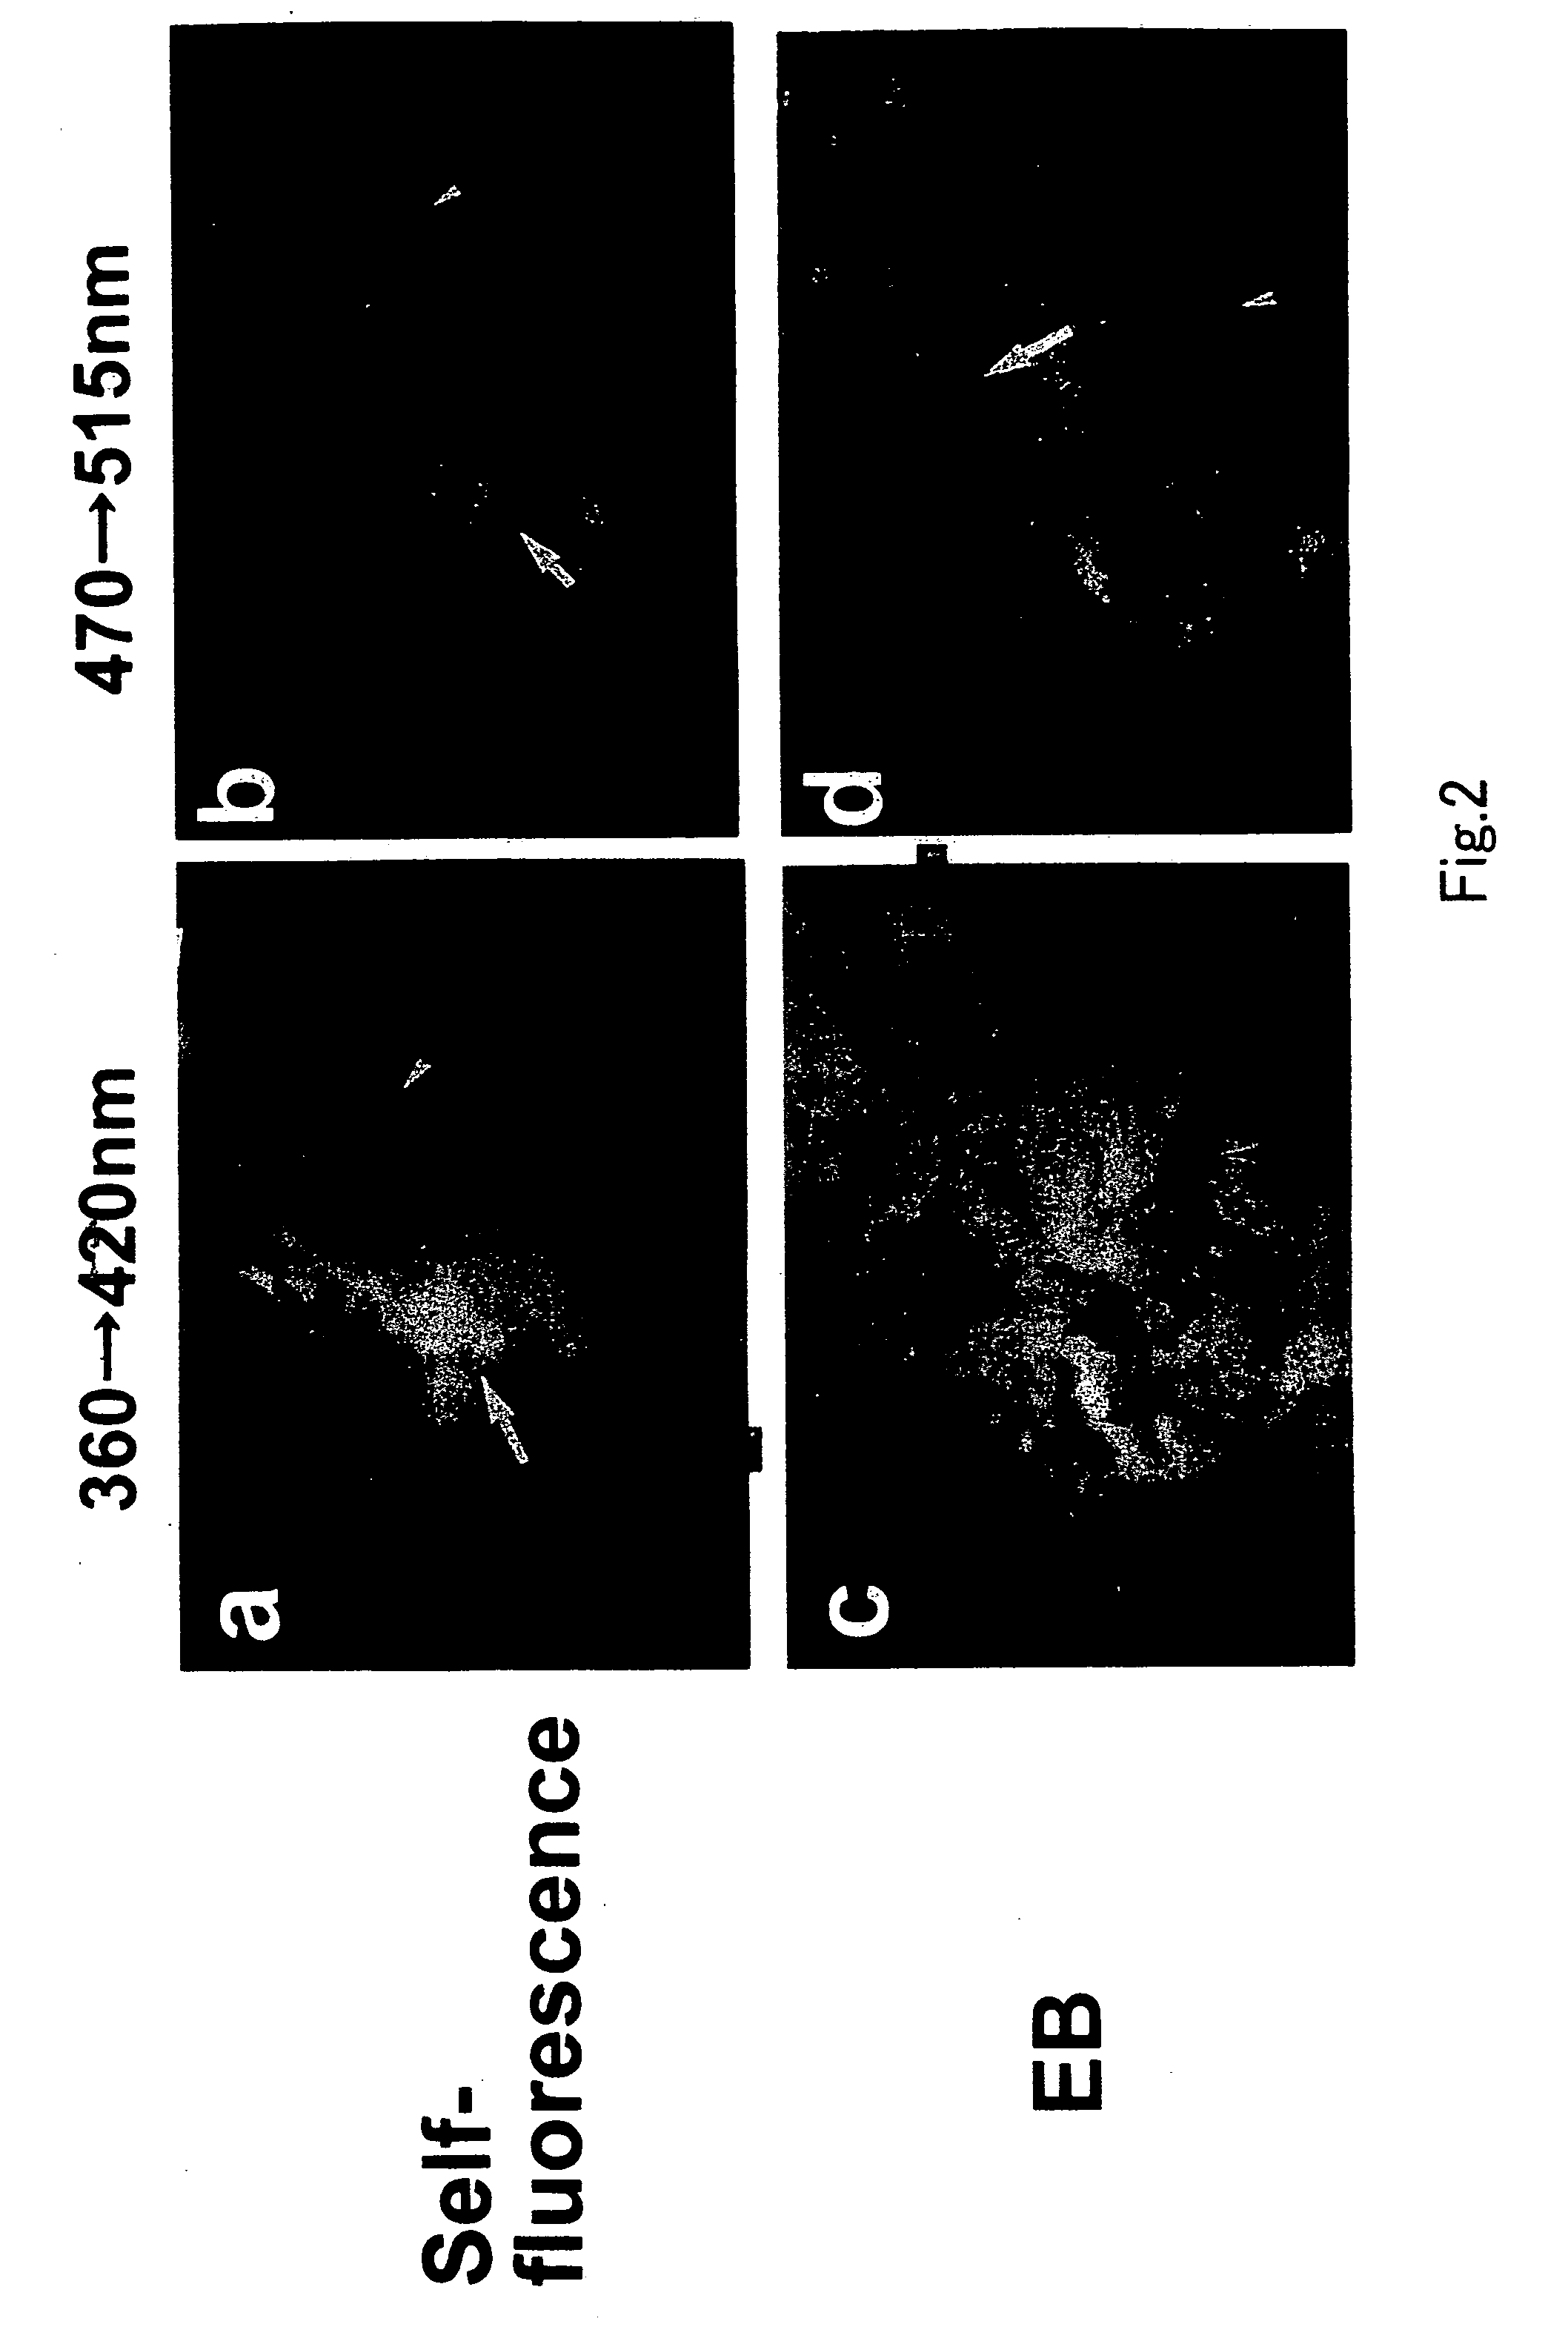 Medicine for detecting lipid components in vivo and vascular endoscope